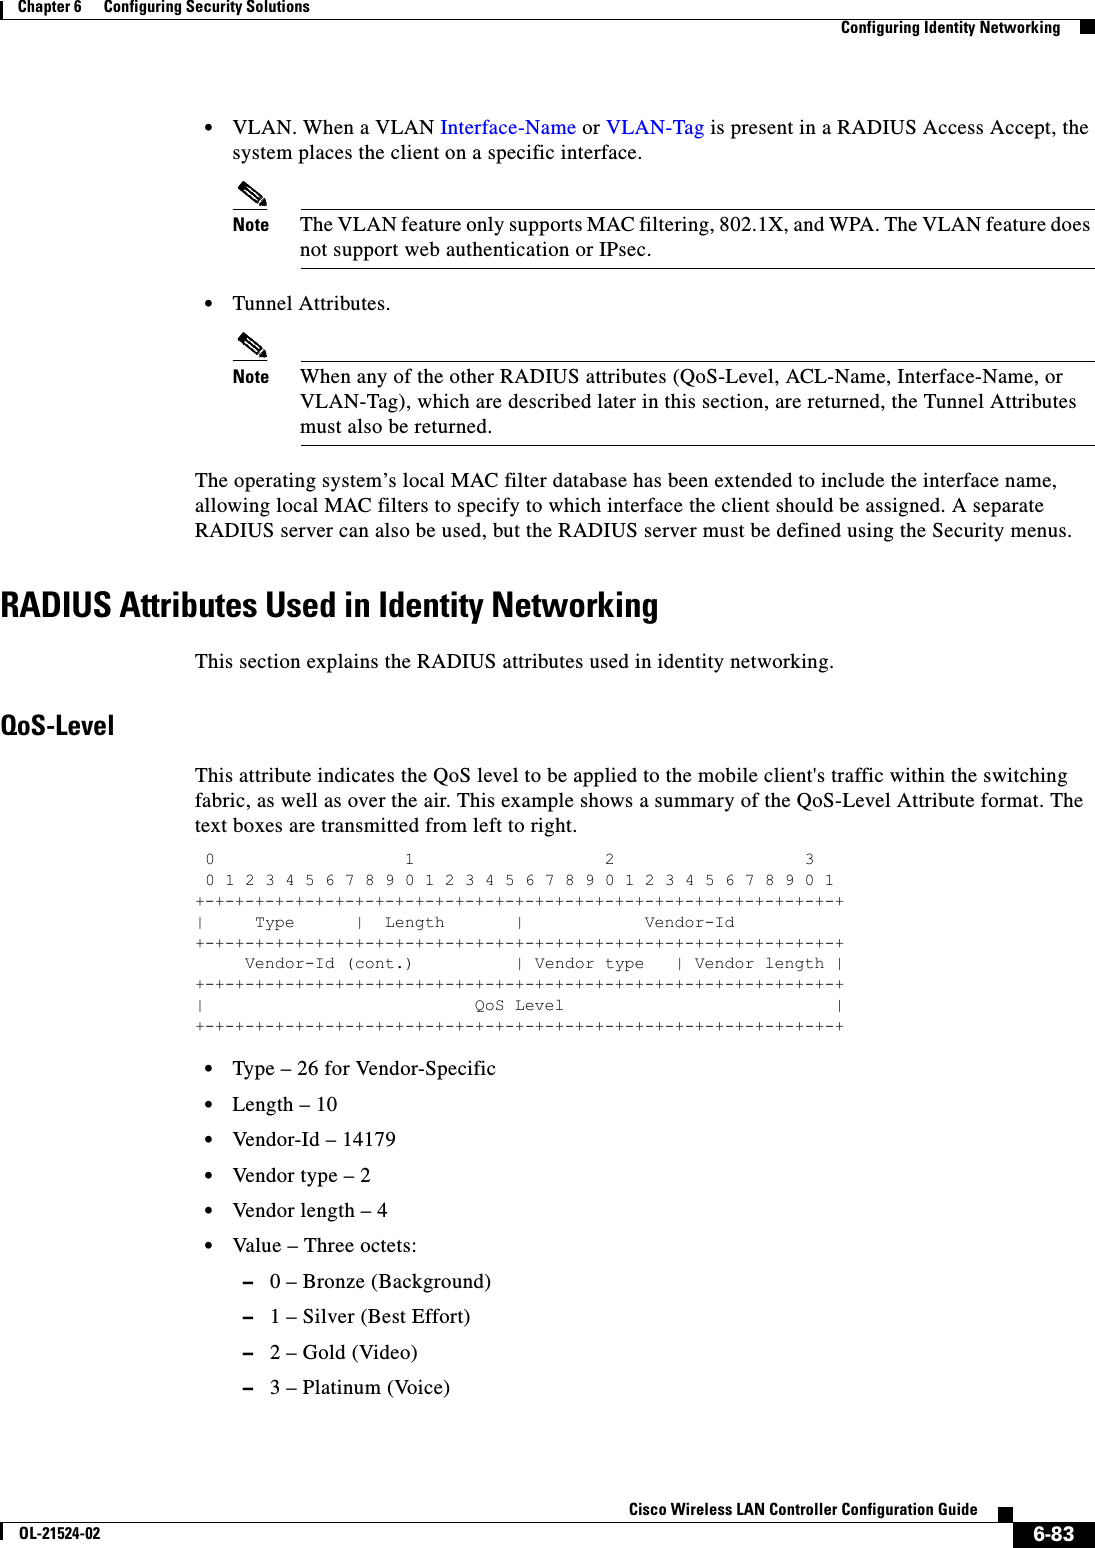  6-83Cisco Wireless LAN Controller Configuration GuideOL-21524-02Chapter 6      Configuring Security Solutions  Configuring Identity Networking  • VLAN. When a VLAN Interface-Name or VLAN-Tag is present in a RADIUS Access Accept, the system places the client on a specific interface. Note The VLAN feature only supports MAC filtering, 802.1X, and WPA. The VLAN feature does not support web authentication or IPsec.  • Tunnel Attributes.Note When any of the other RADIUS attributes (QoS-Level, ACL-Name, Interface-Name, or VLAN-Tag), which are described later in this section, are returned, the Tunnel Attributes must also be returned.The operating system’s local MAC filter database has been extended to include the interface name, allowing local MAC filters to specify to which interface the client should be assigned. A separate RADIUS server can also be used, but the RADIUS server must be defined using the Security menus.RADIUS Attributes Used in Identity NetworkingThis section explains the RADIUS attributes used in identity networking.QoS-LevelThis attribute indicates the QoS level to be applied to the mobile client&apos;s traffic within the switching fabric, as well as over the air. This example shows a summary of the QoS-Level Attribute format. The text boxes are transmitted from left to right. 0                   1                   2                   3  0 1 2 3 4 5 6 7 8 9 0 1 2 3 4 5 6 7 8 9 0 1 2 3 4 5 6 7 8 9 0 1 +-+-+-+-+-+-+-+-+-+-+-+-+-+-+-+-+-+-+-+-+-+-+-+-+-+-+-+-+-+-+-+-+ |     Type      |  Length       |            Vendor-Id +-+-+-+-+-+-+-+-+-+-+-+-+-+-+-+-+-+-+-+-+-+-+-+-+-+-+-+-+-+-+-+-+      Vendor-Id (cont.)          | Vendor type   | Vendor length | +-+-+-+-+-+-+-+-+-+-+-+-+-+-+-+-+-+-+-+-+-+-+-+-+-+-+-+-+-+-+-+-+ |                           QoS Level                           | +-+-+-+-+-+-+-+-+-+-+-+-+-+-+-+-+-+-+-+-+-+-+-+-+-+-+-+-+-+-+-+-+   • Type – 26 for Vendor-Specific  • Length – 10  • Vendor-Id – 14179  • Vendor type – 2  • Vendor length – 4  • Value – Three octets:  –0 – Bronze (Background)  –1 – Silver (Best Effort)  –2 – Gold (Video)  –3 – Platinum (Voice)